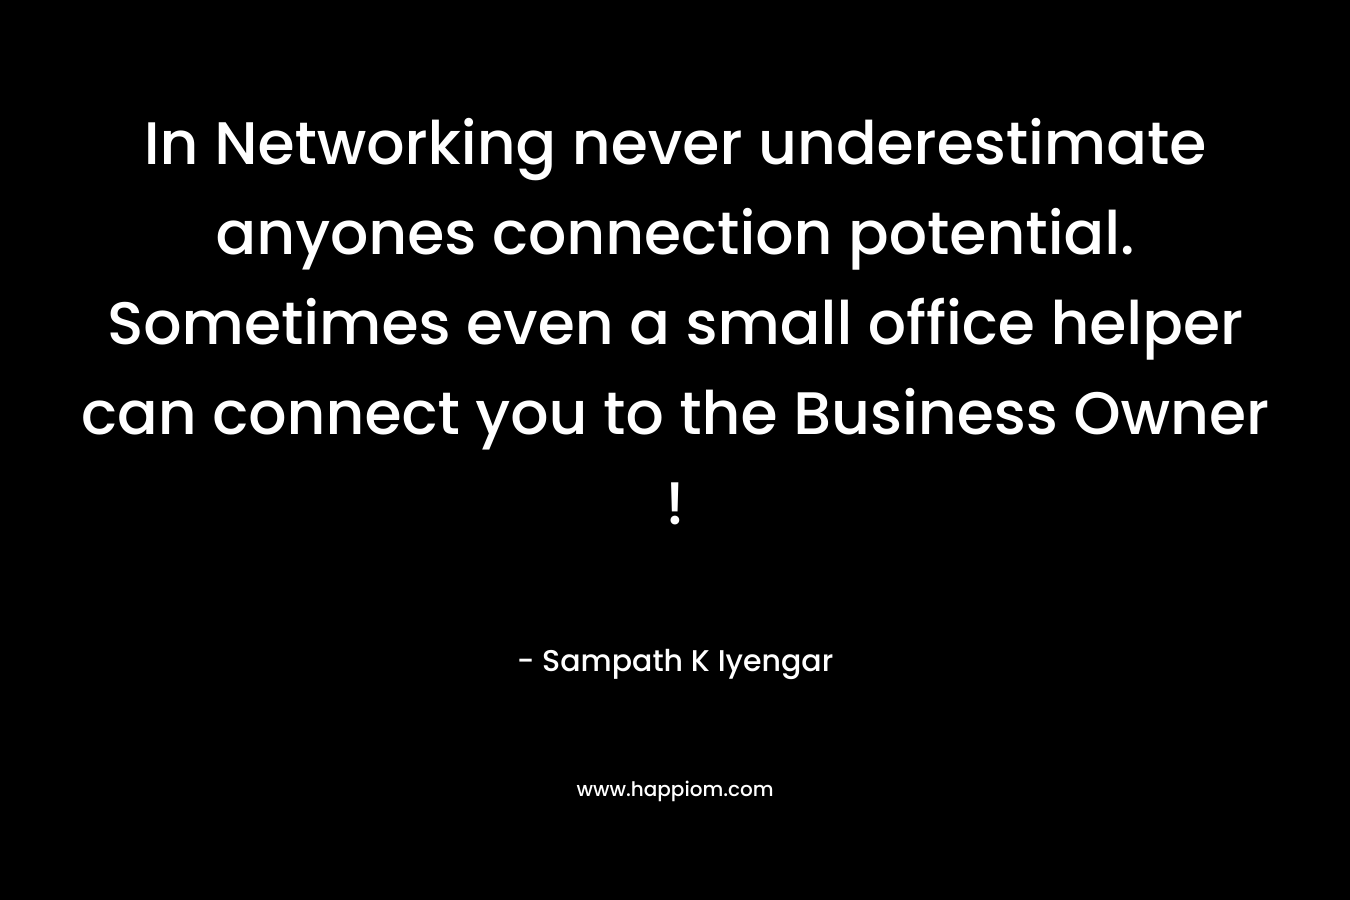 In Networking never underestimate anyones connection potential. Sometimes even a small office helper can connect you to the Business Owner !